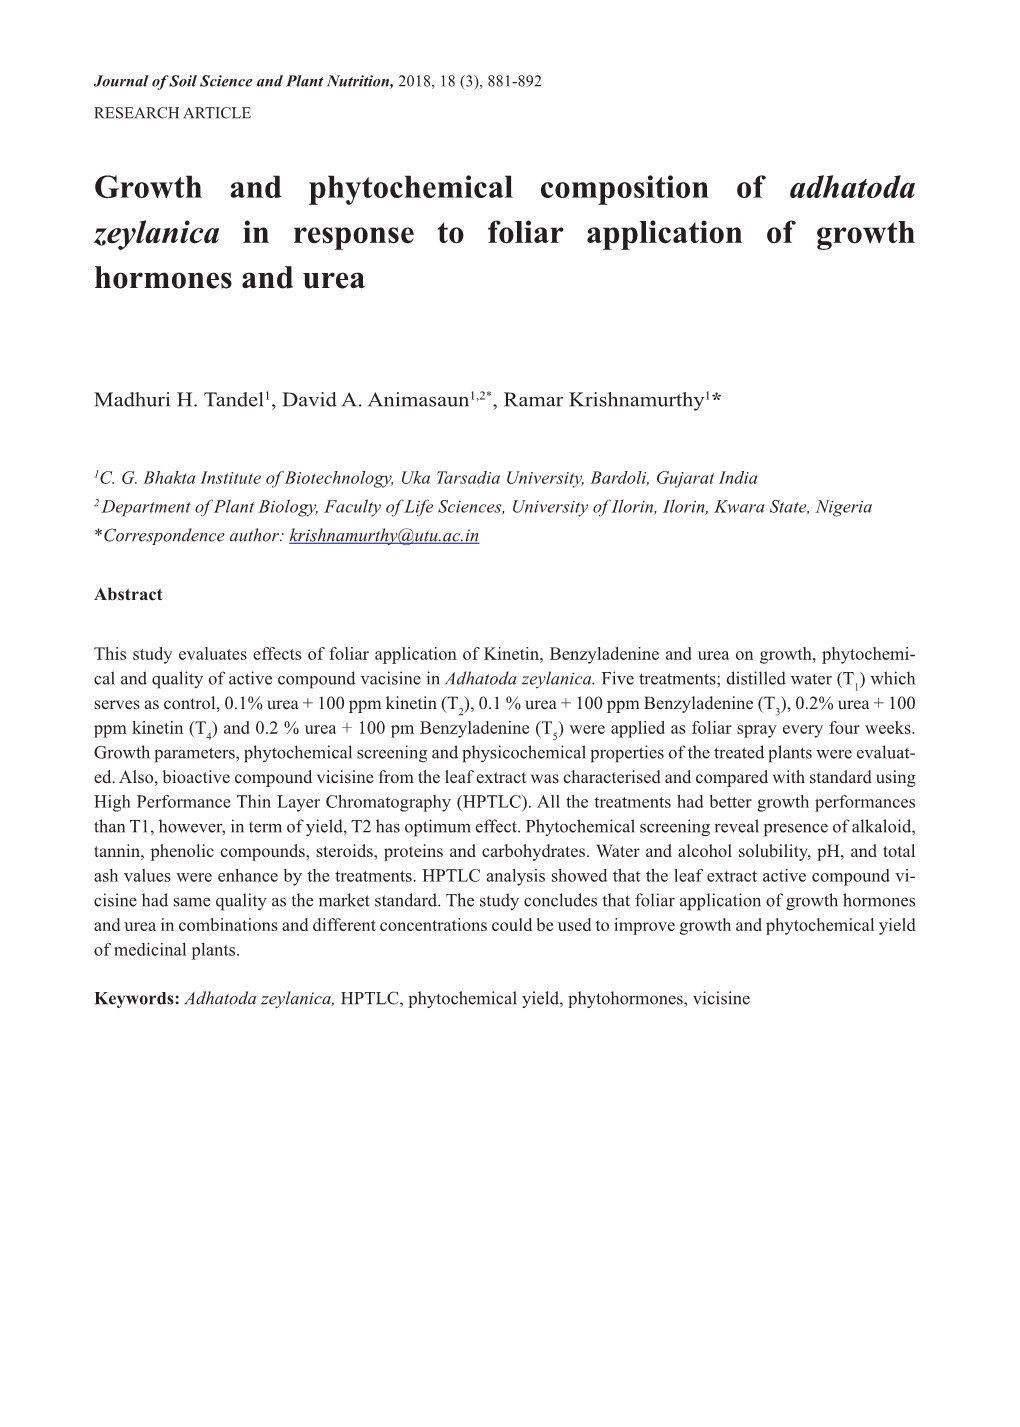 Growth and Phytochemical Composition of Adhatoda Zeylanica in Response to Foliar Application of Growth Hormones and Urea